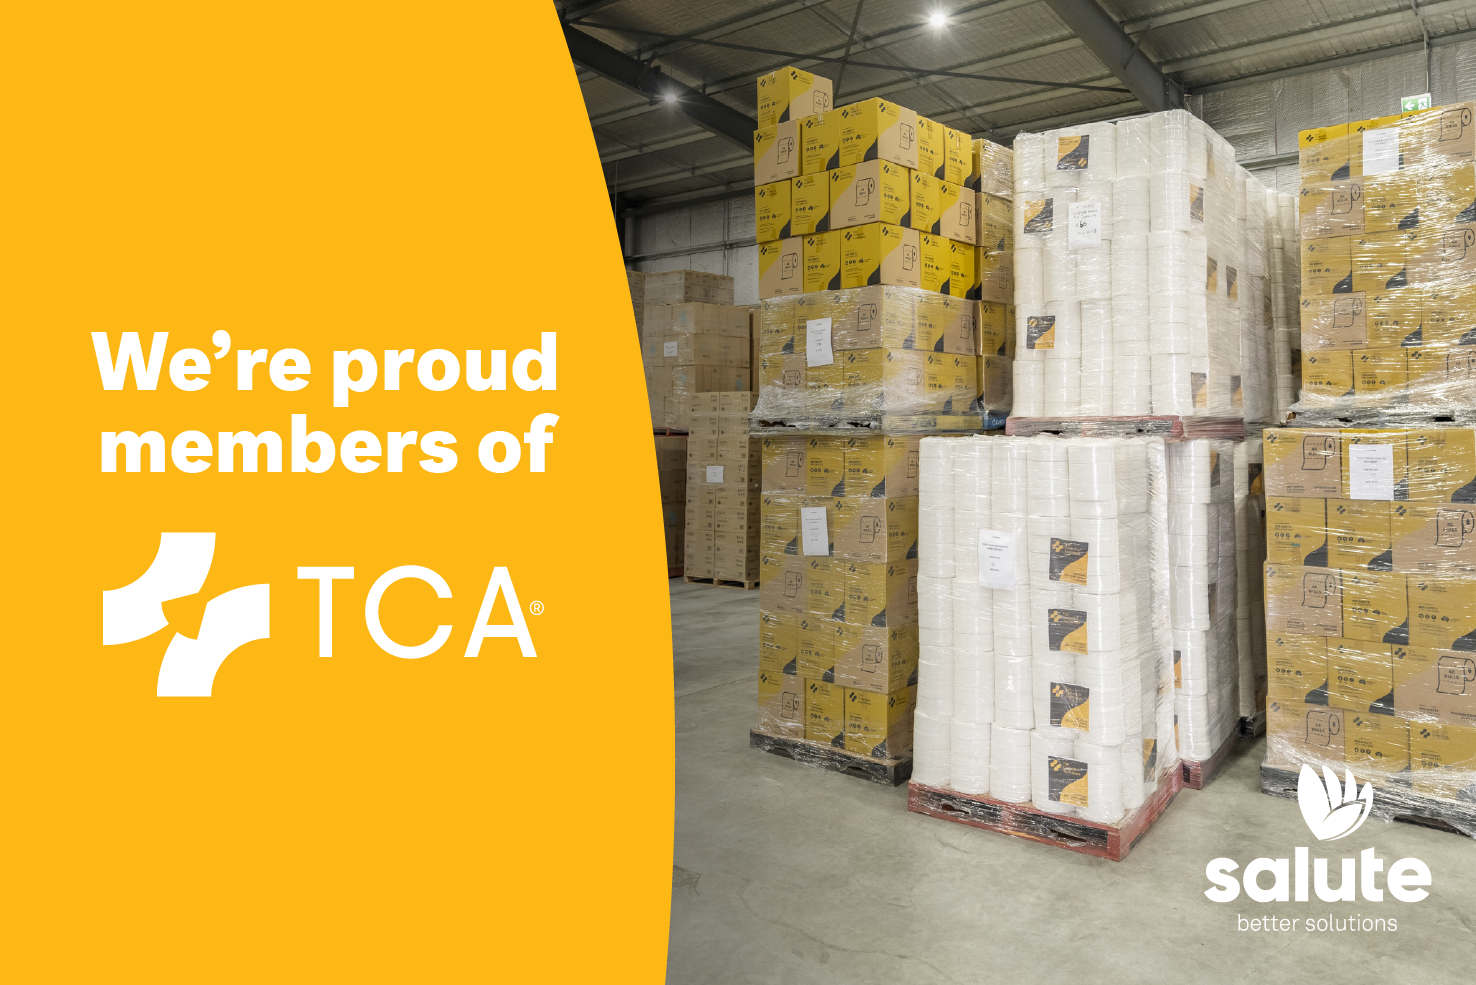 We're proud to be a member of TCA